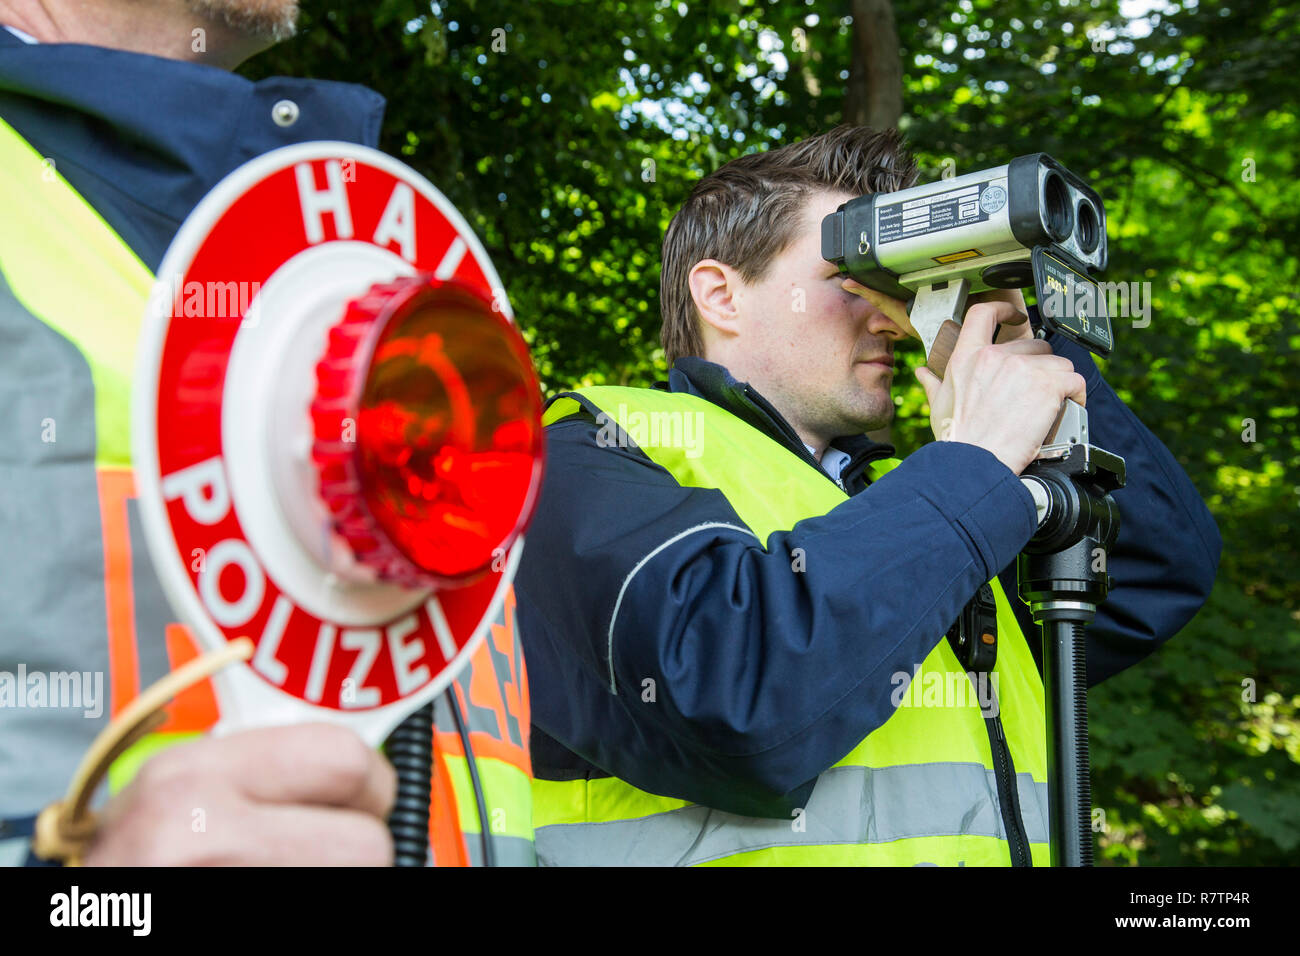 Police during speed monitoring with a laser gun or hand-held laser meter, North Rhine-Westphalia, Germany Stock Photo